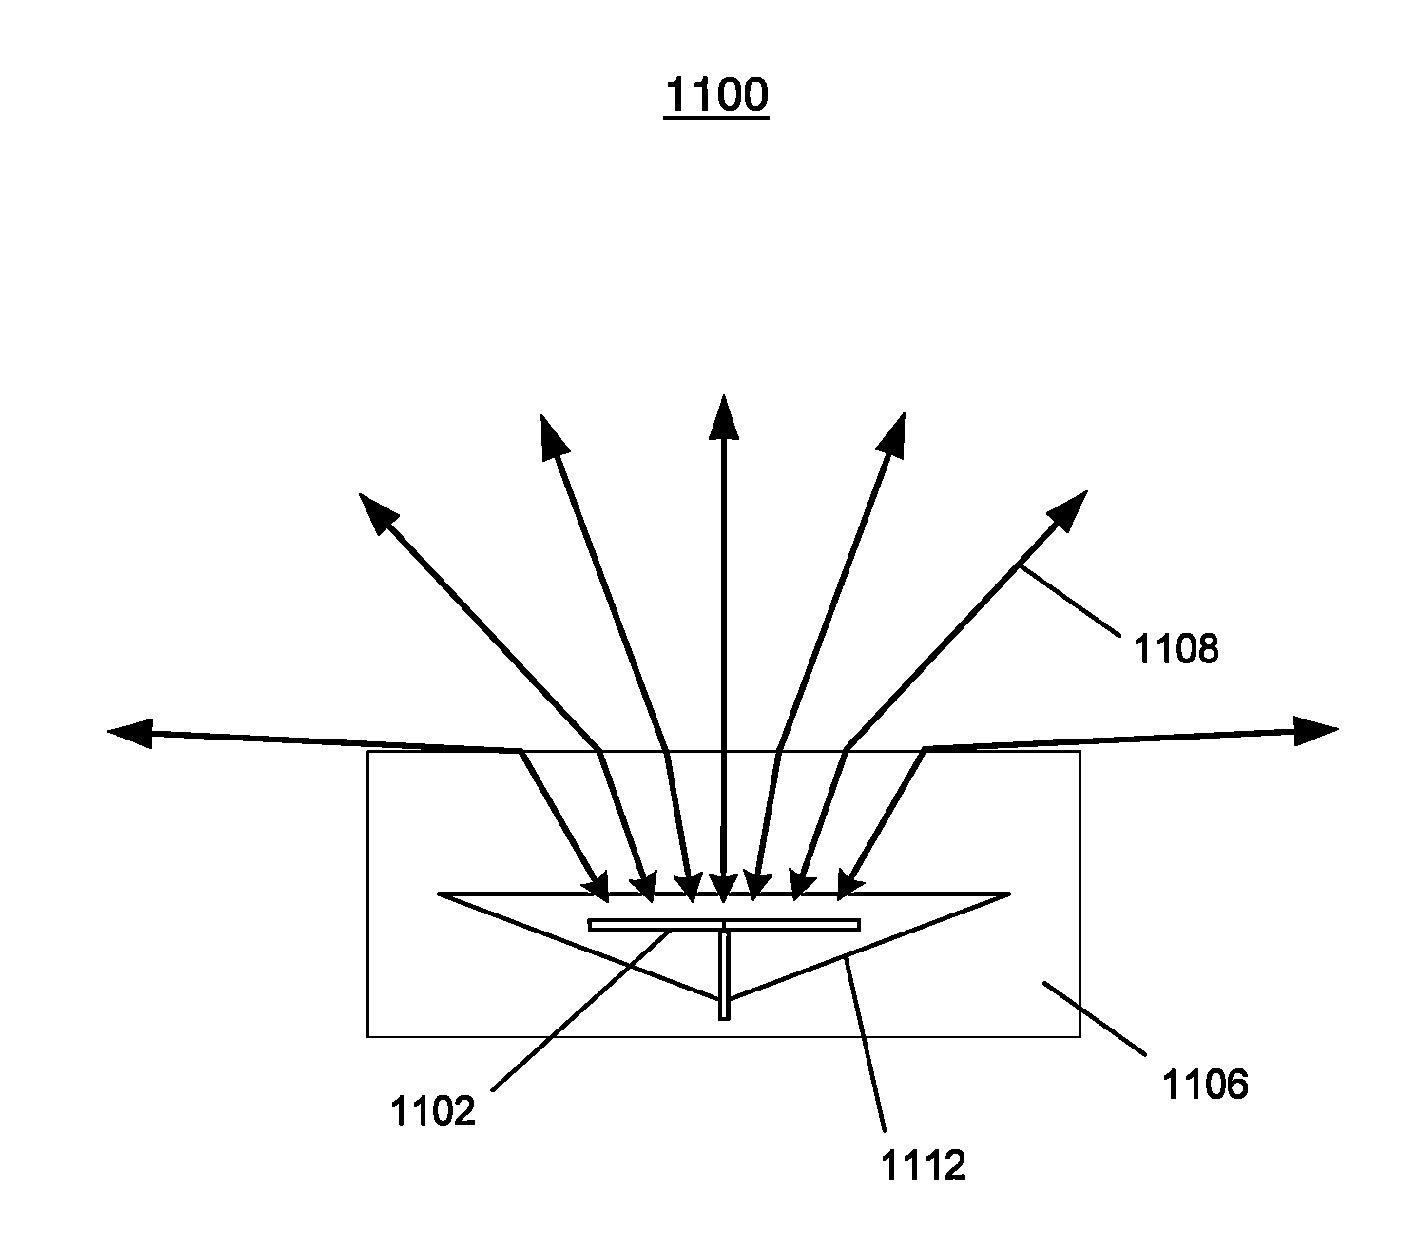 System and method for monitoring objects, people, animals or places